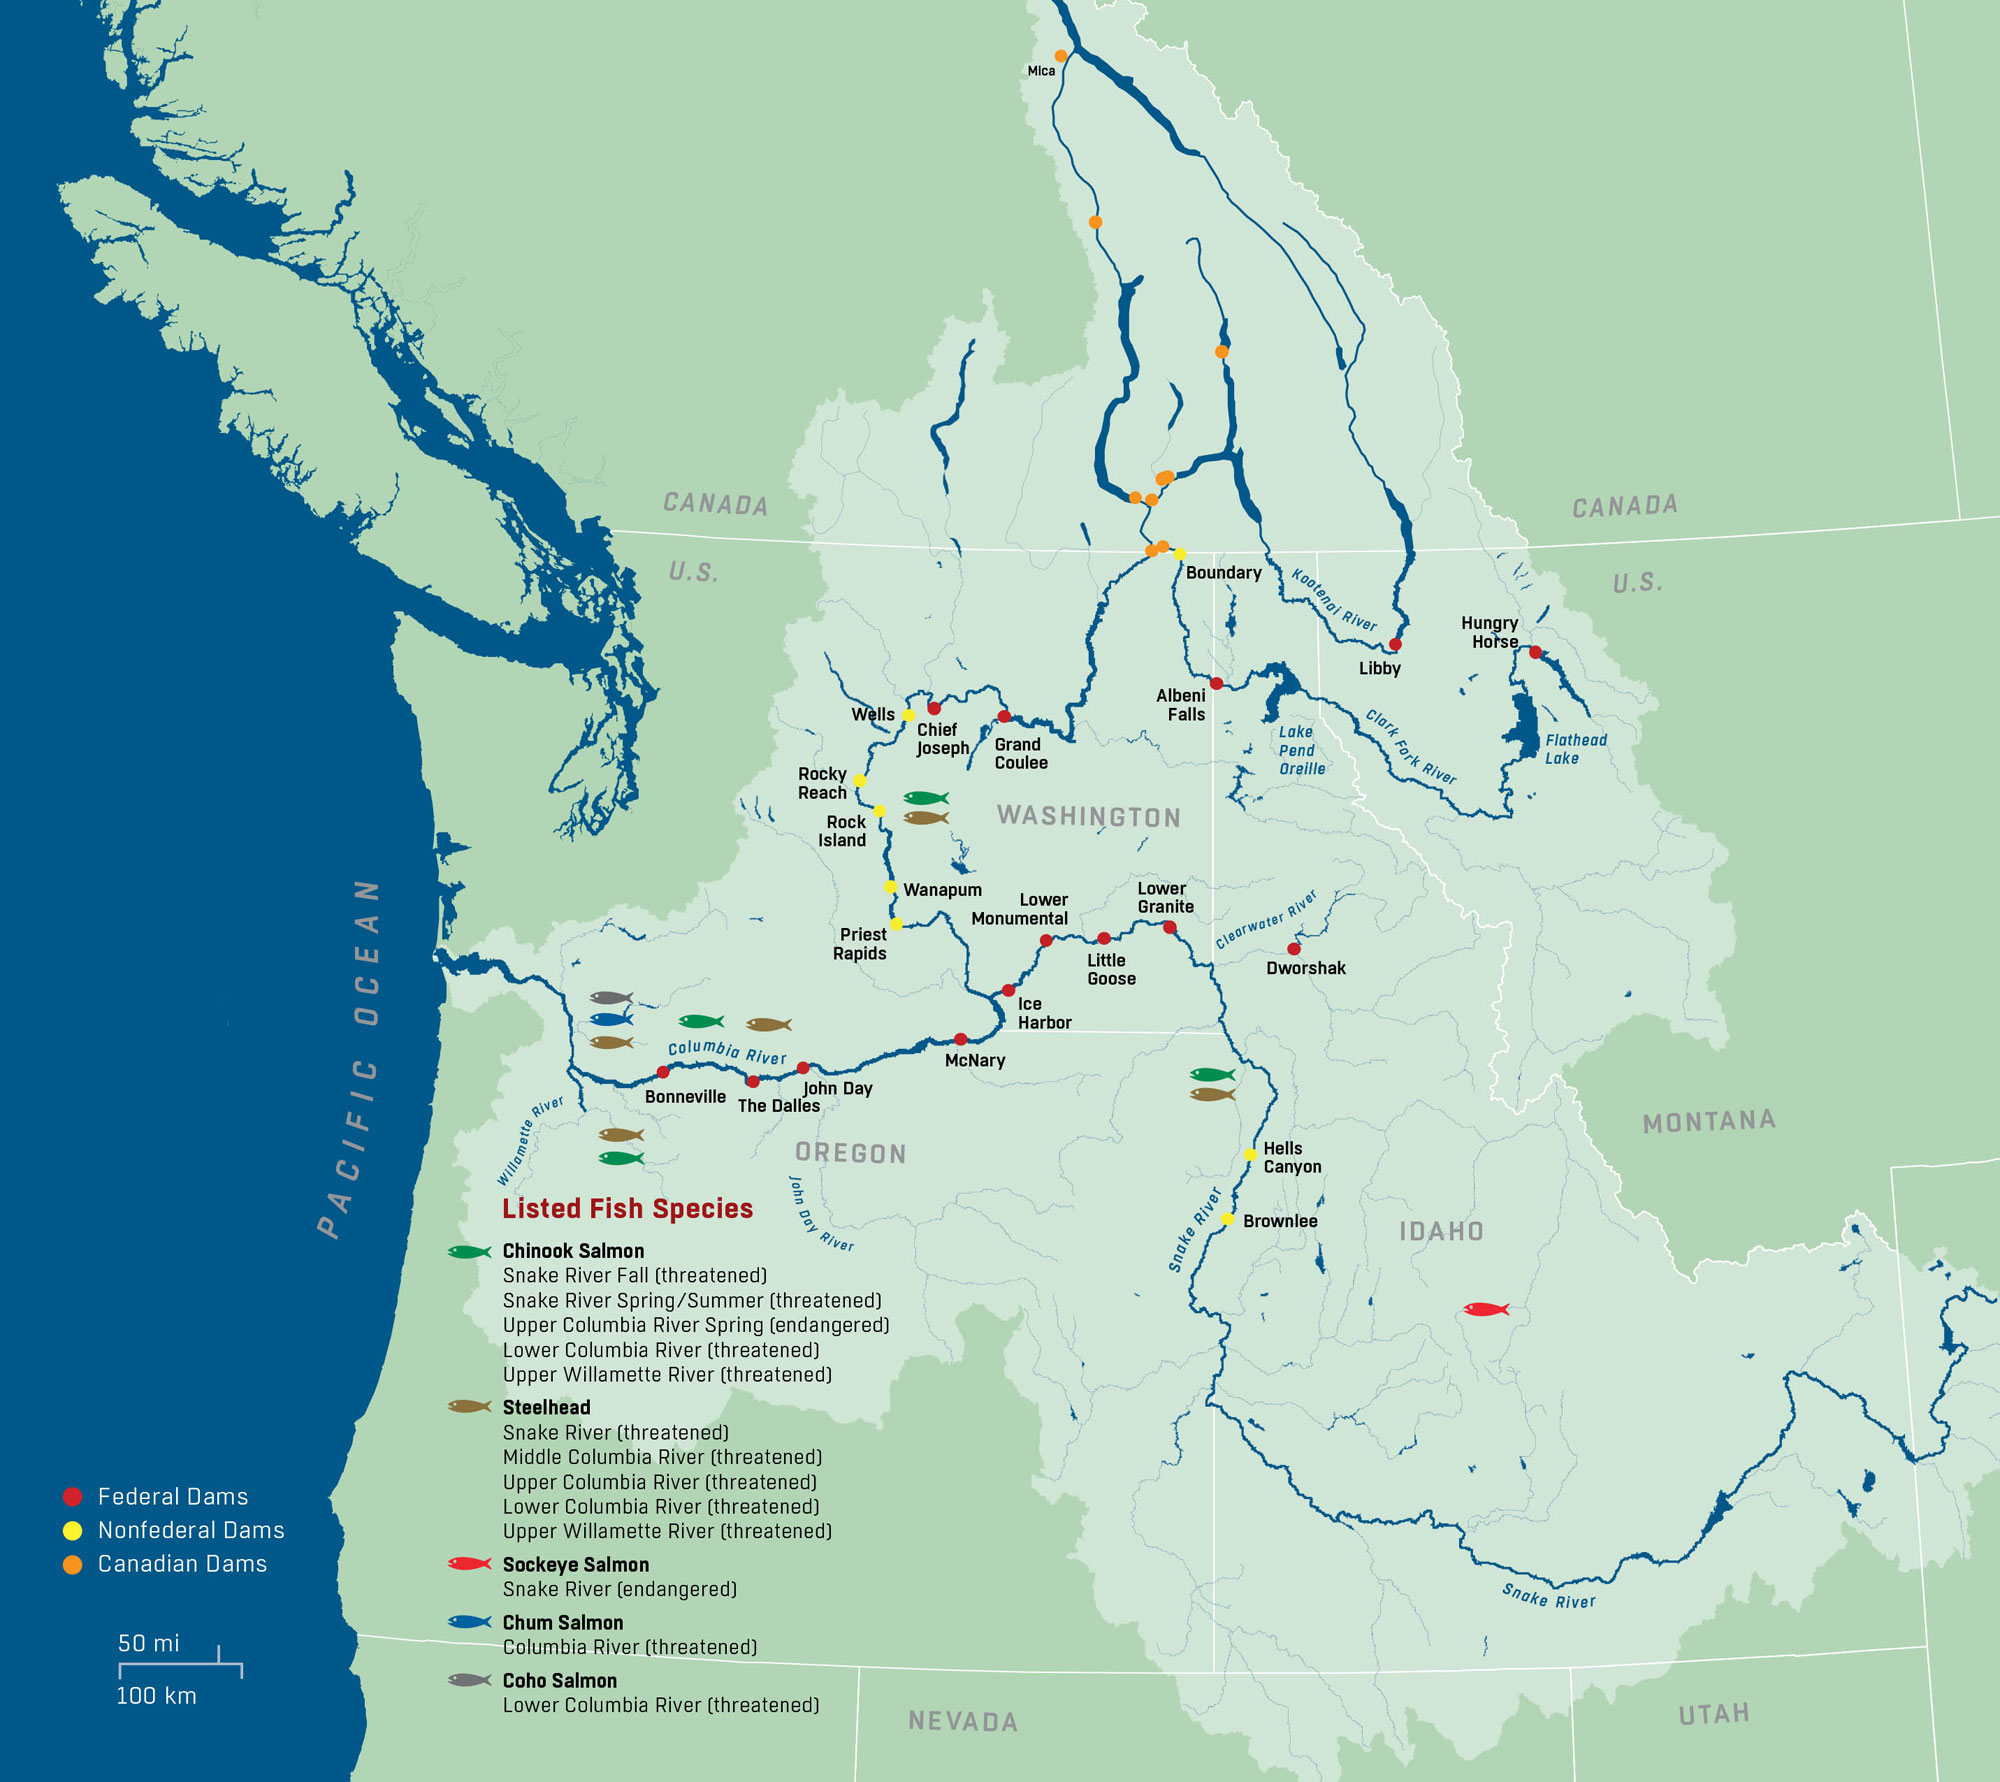 Map of the Columbia River Basin in Washington, Oregon, Idaho, southern Canada, western Montana, and western Wyoming. The map shows the locations of major U.S. federal dams, other major U.S. dams, and Canadian dams dotted throughout the region, as well as the distributions of salmon and steelhead species in the watershed. In the lower left part of the image, a list of endangered and threatened fish species is given. 